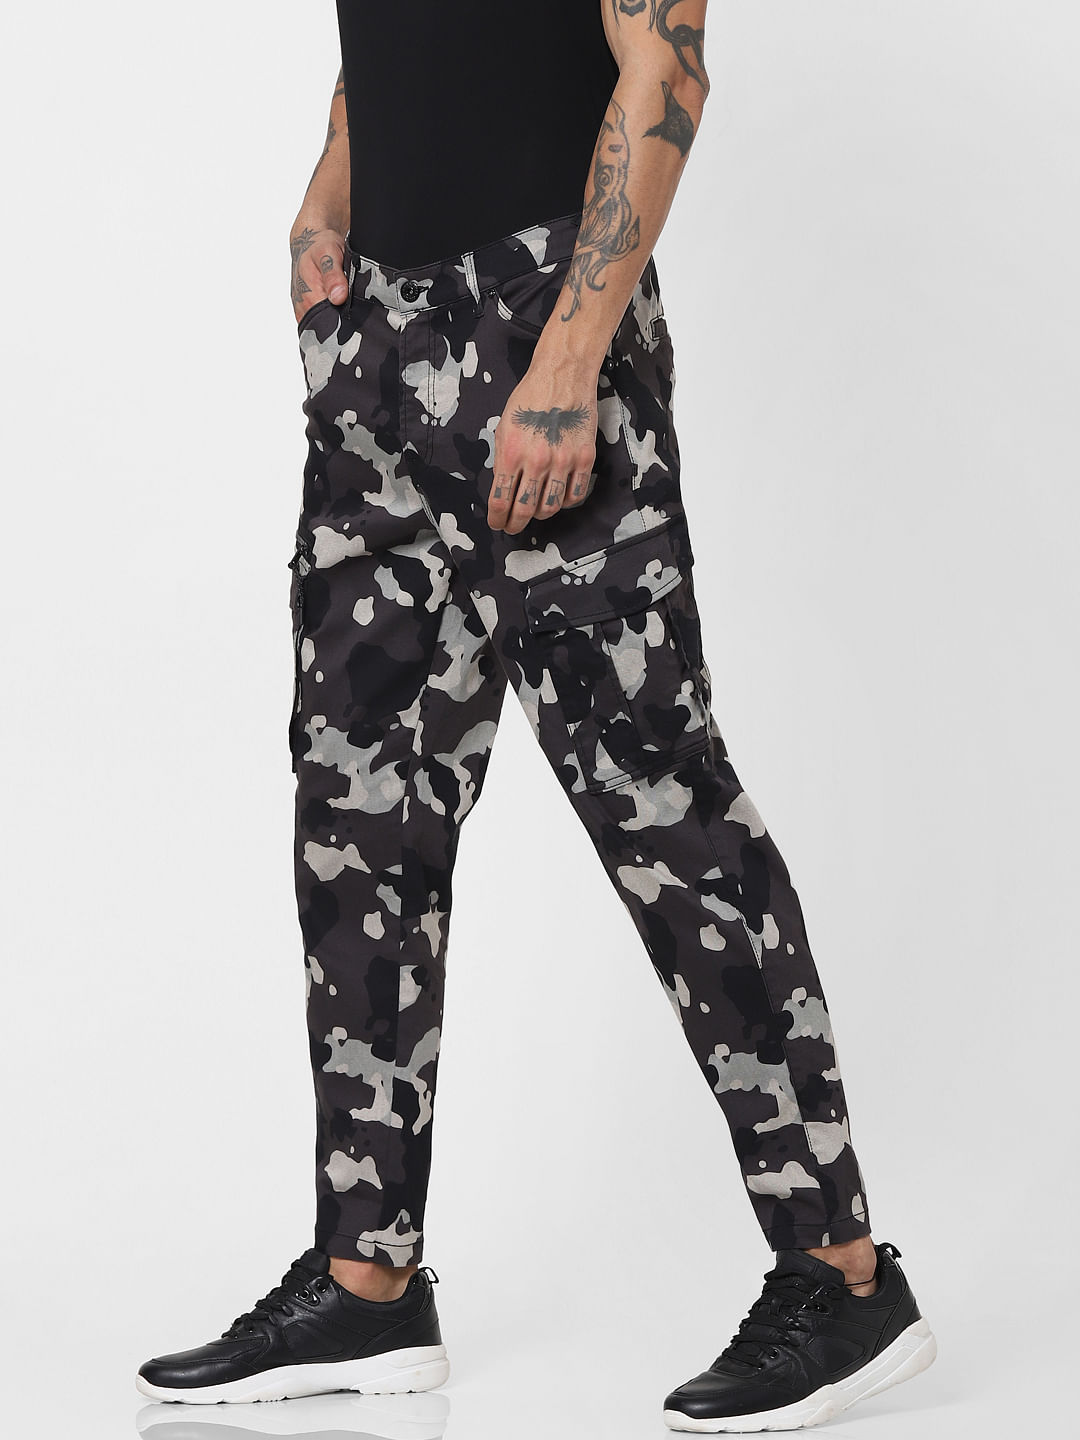 Camouflage Pants  Buy Camouflage Pants online at Best Prices in India   Flipkartcom